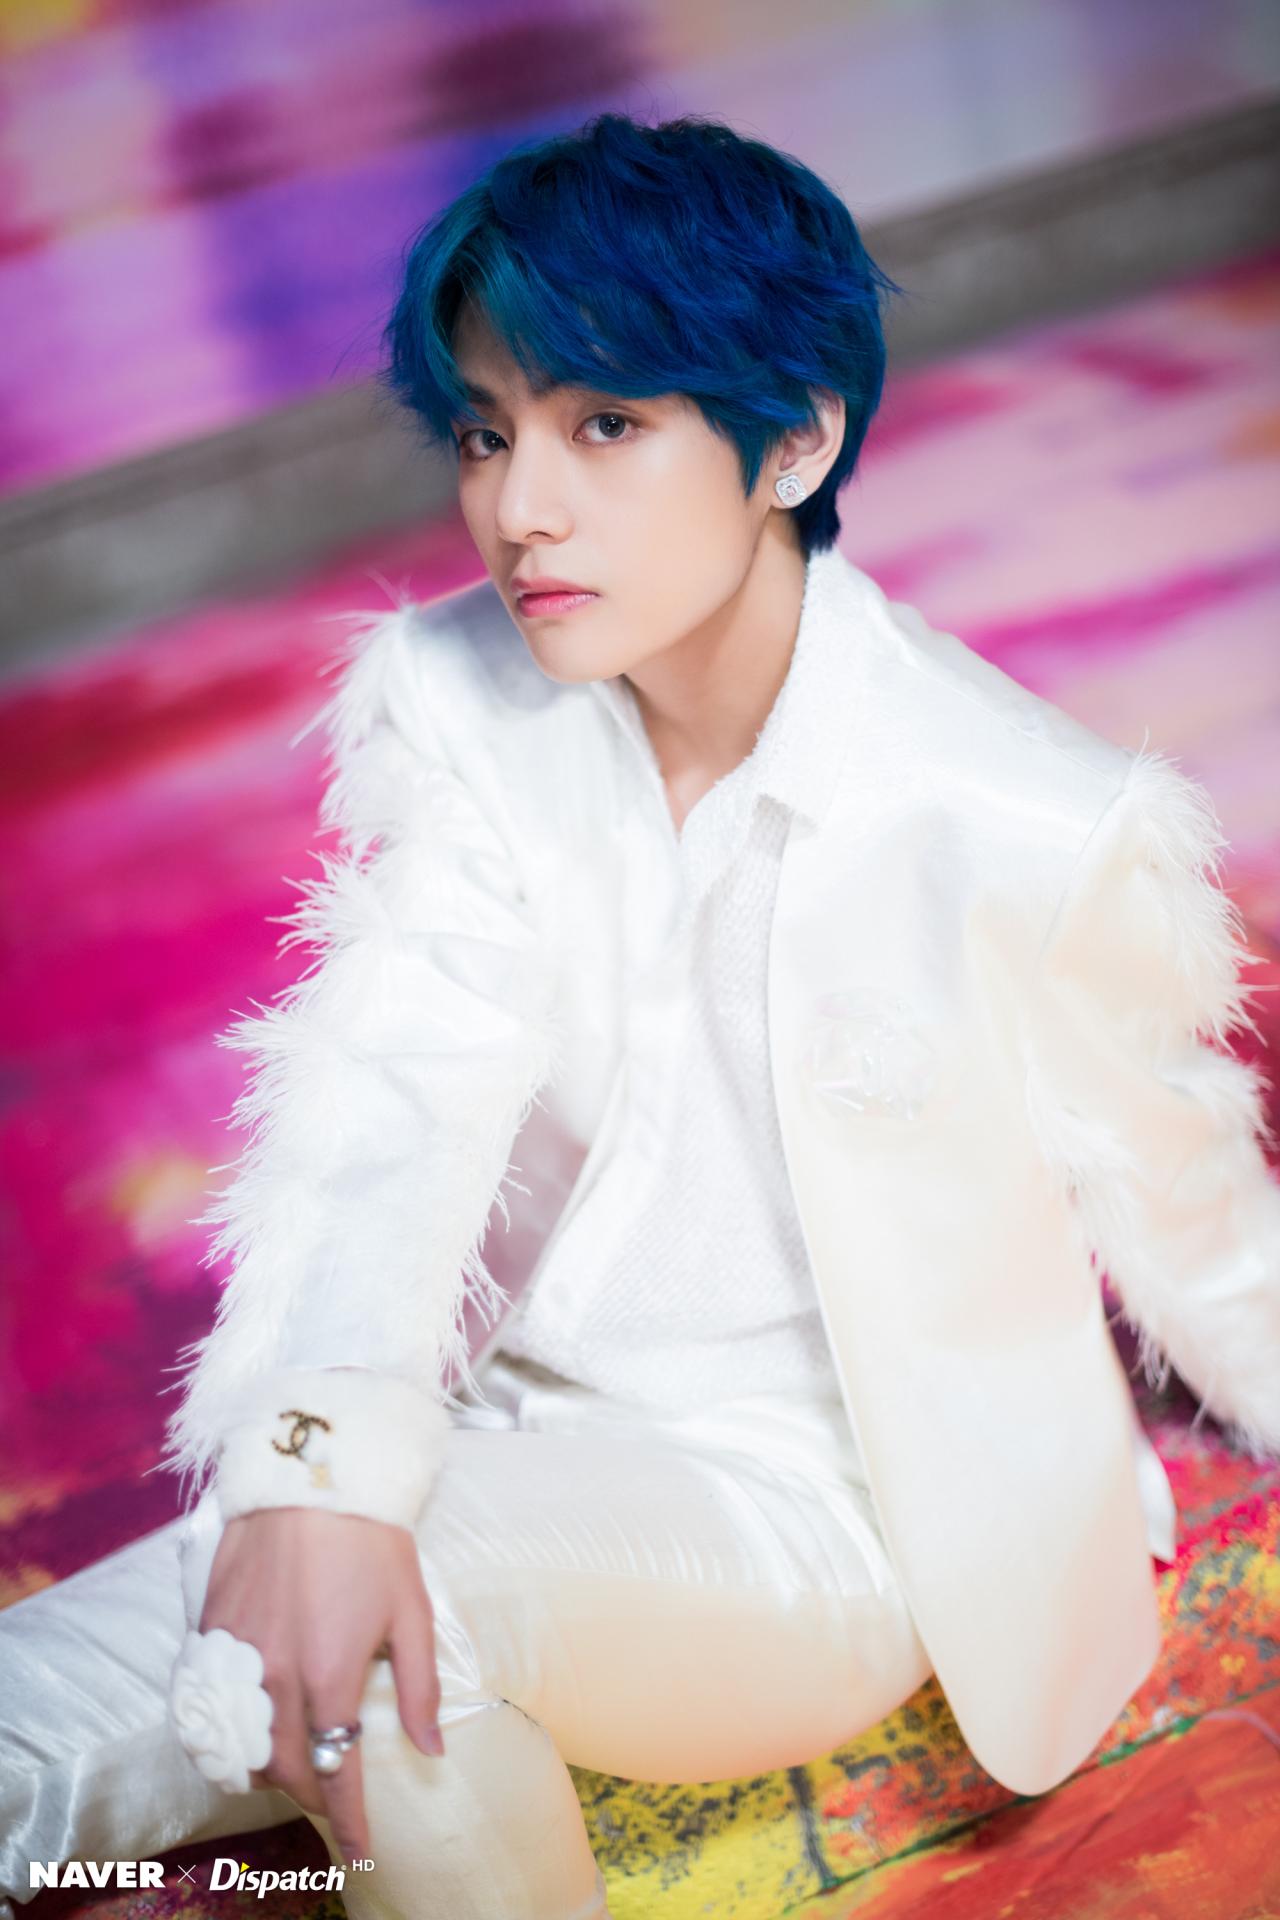 Do you like the Taehyung's blue hair? - Quora